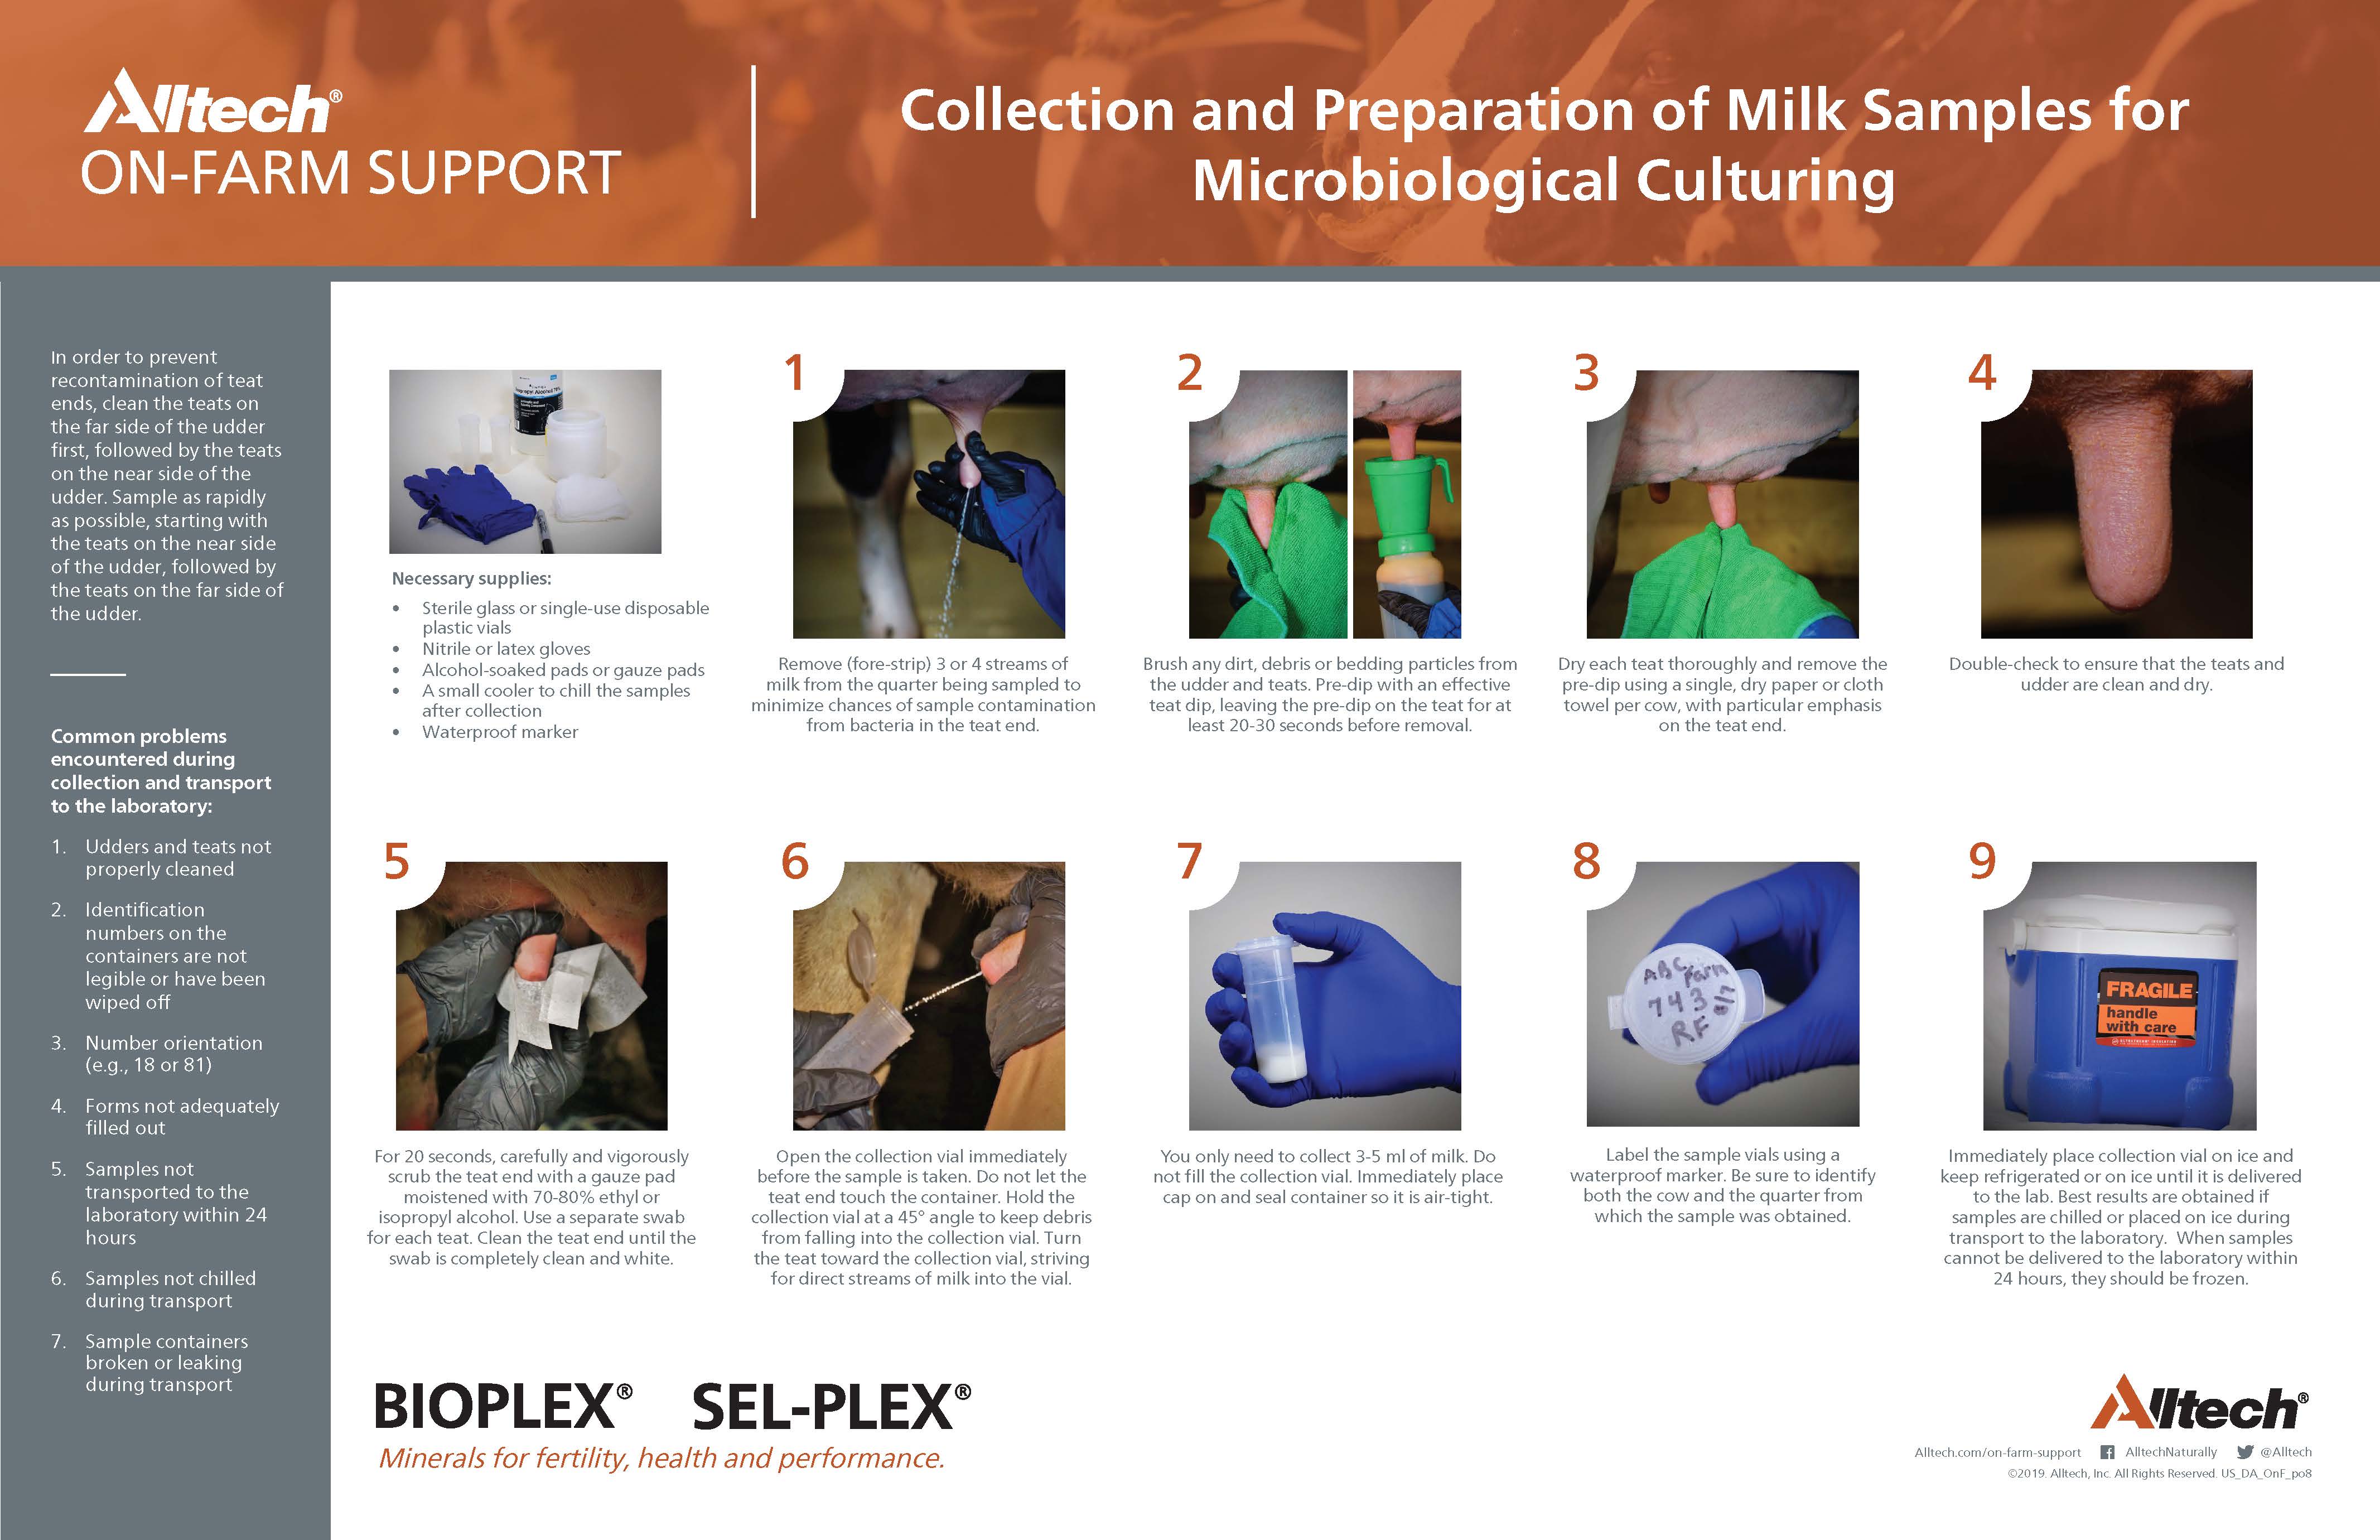 Collection and Preparation of Milk Samples for Microbiological Culturing (PDF - English)